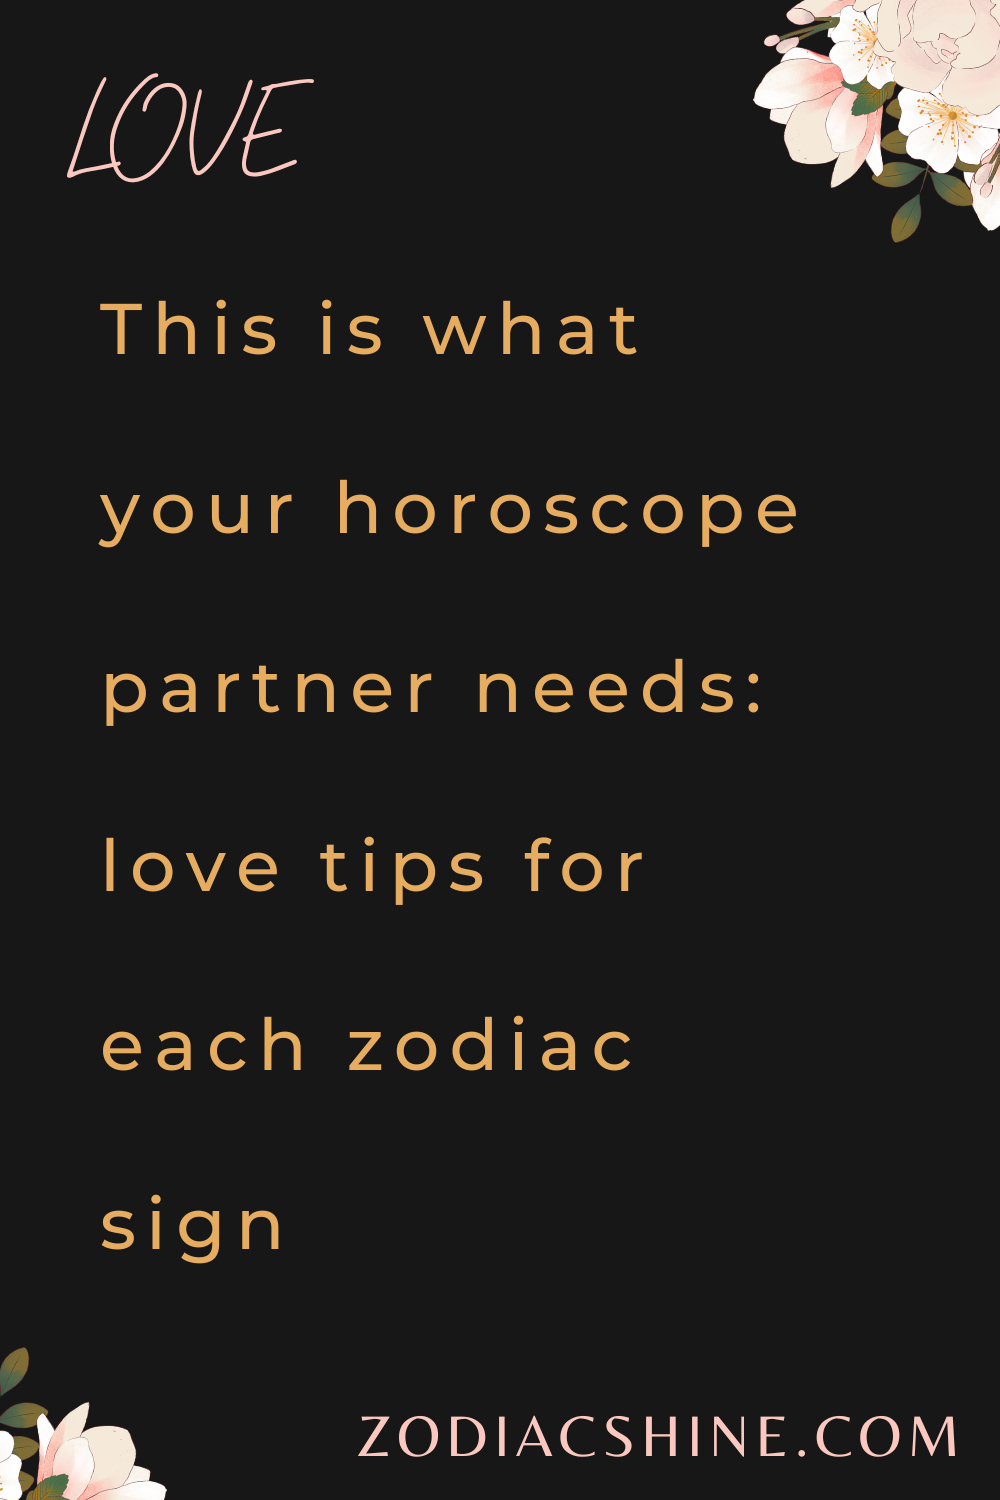 This is what your horoscope partner needs: love tips for each zodiac sign